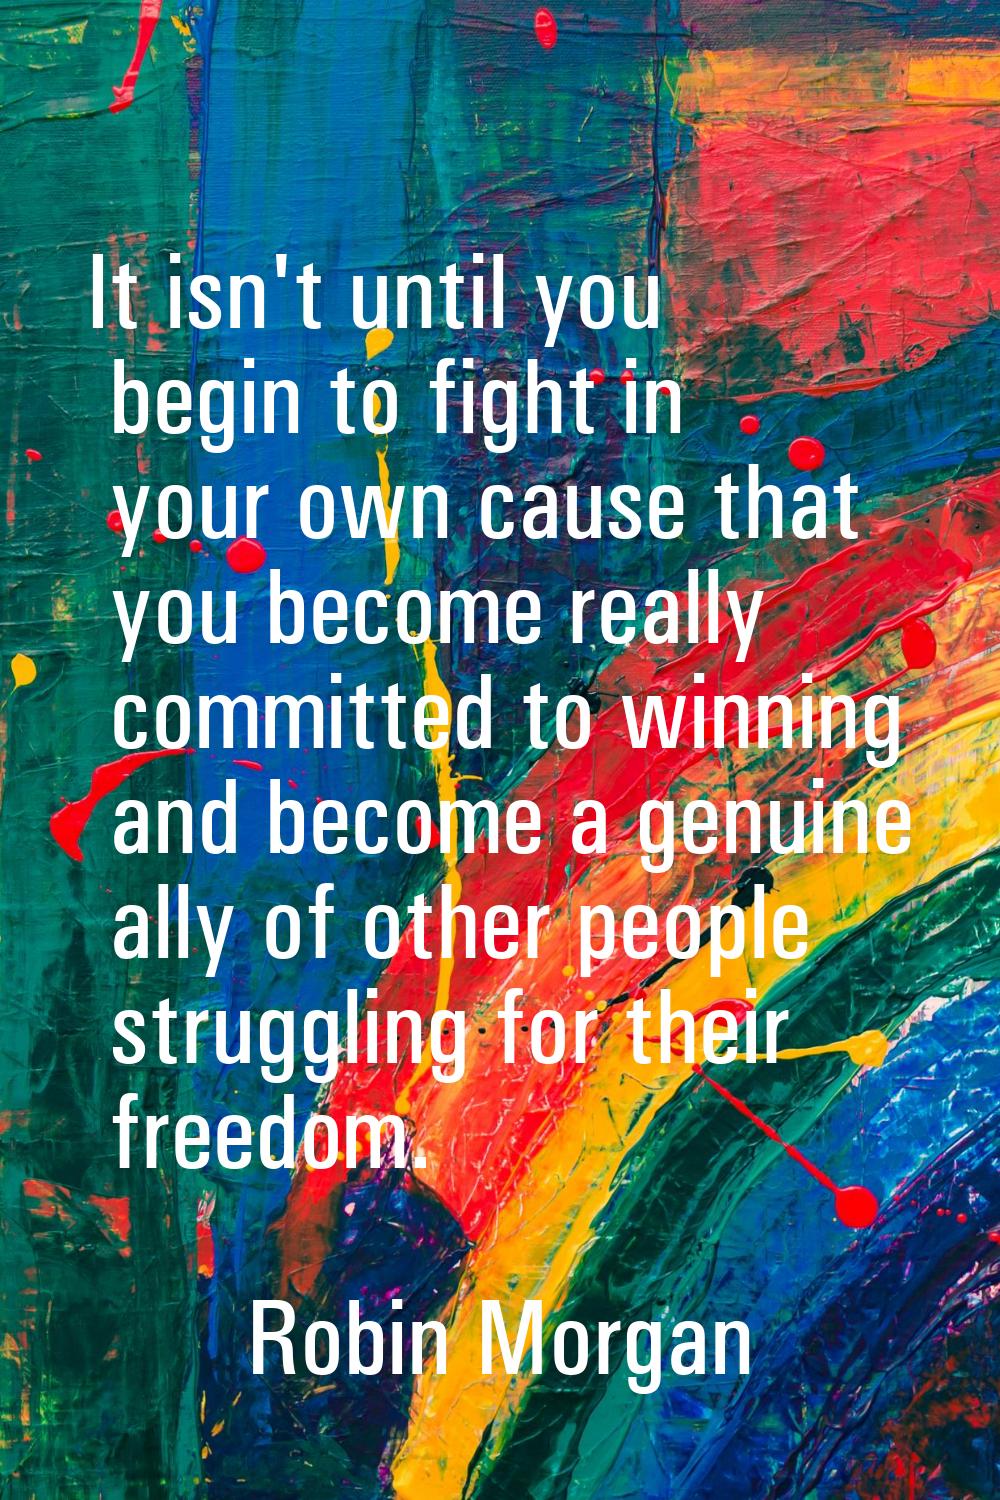 It isn't until you begin to fight in your own cause that you become really committed to winning and